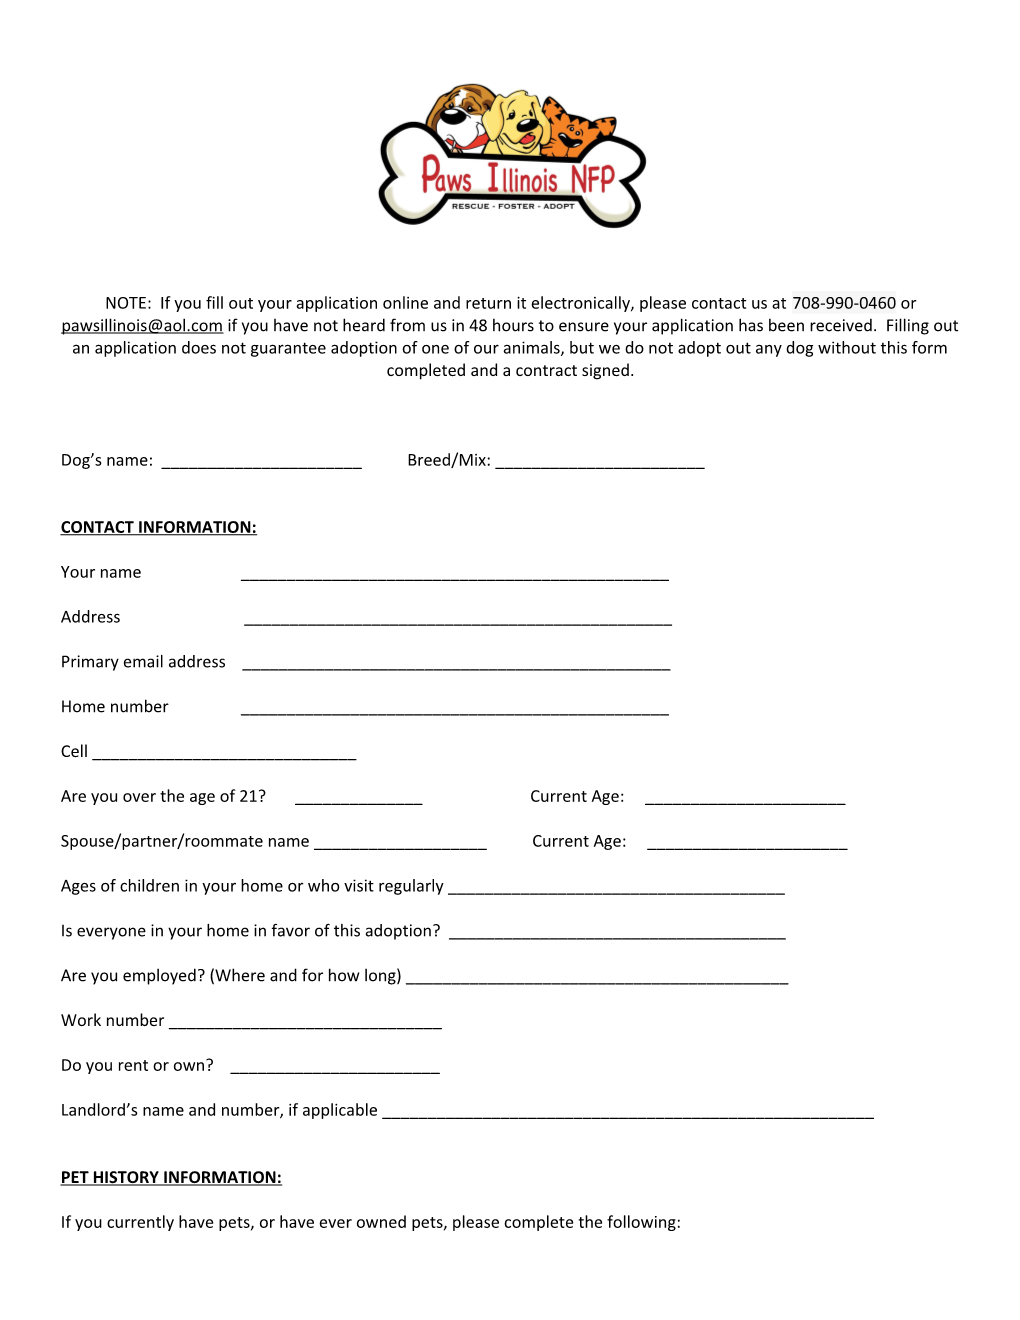 NOTE: If You Fill out Your Application Online and Return It Electronically, Please Contact